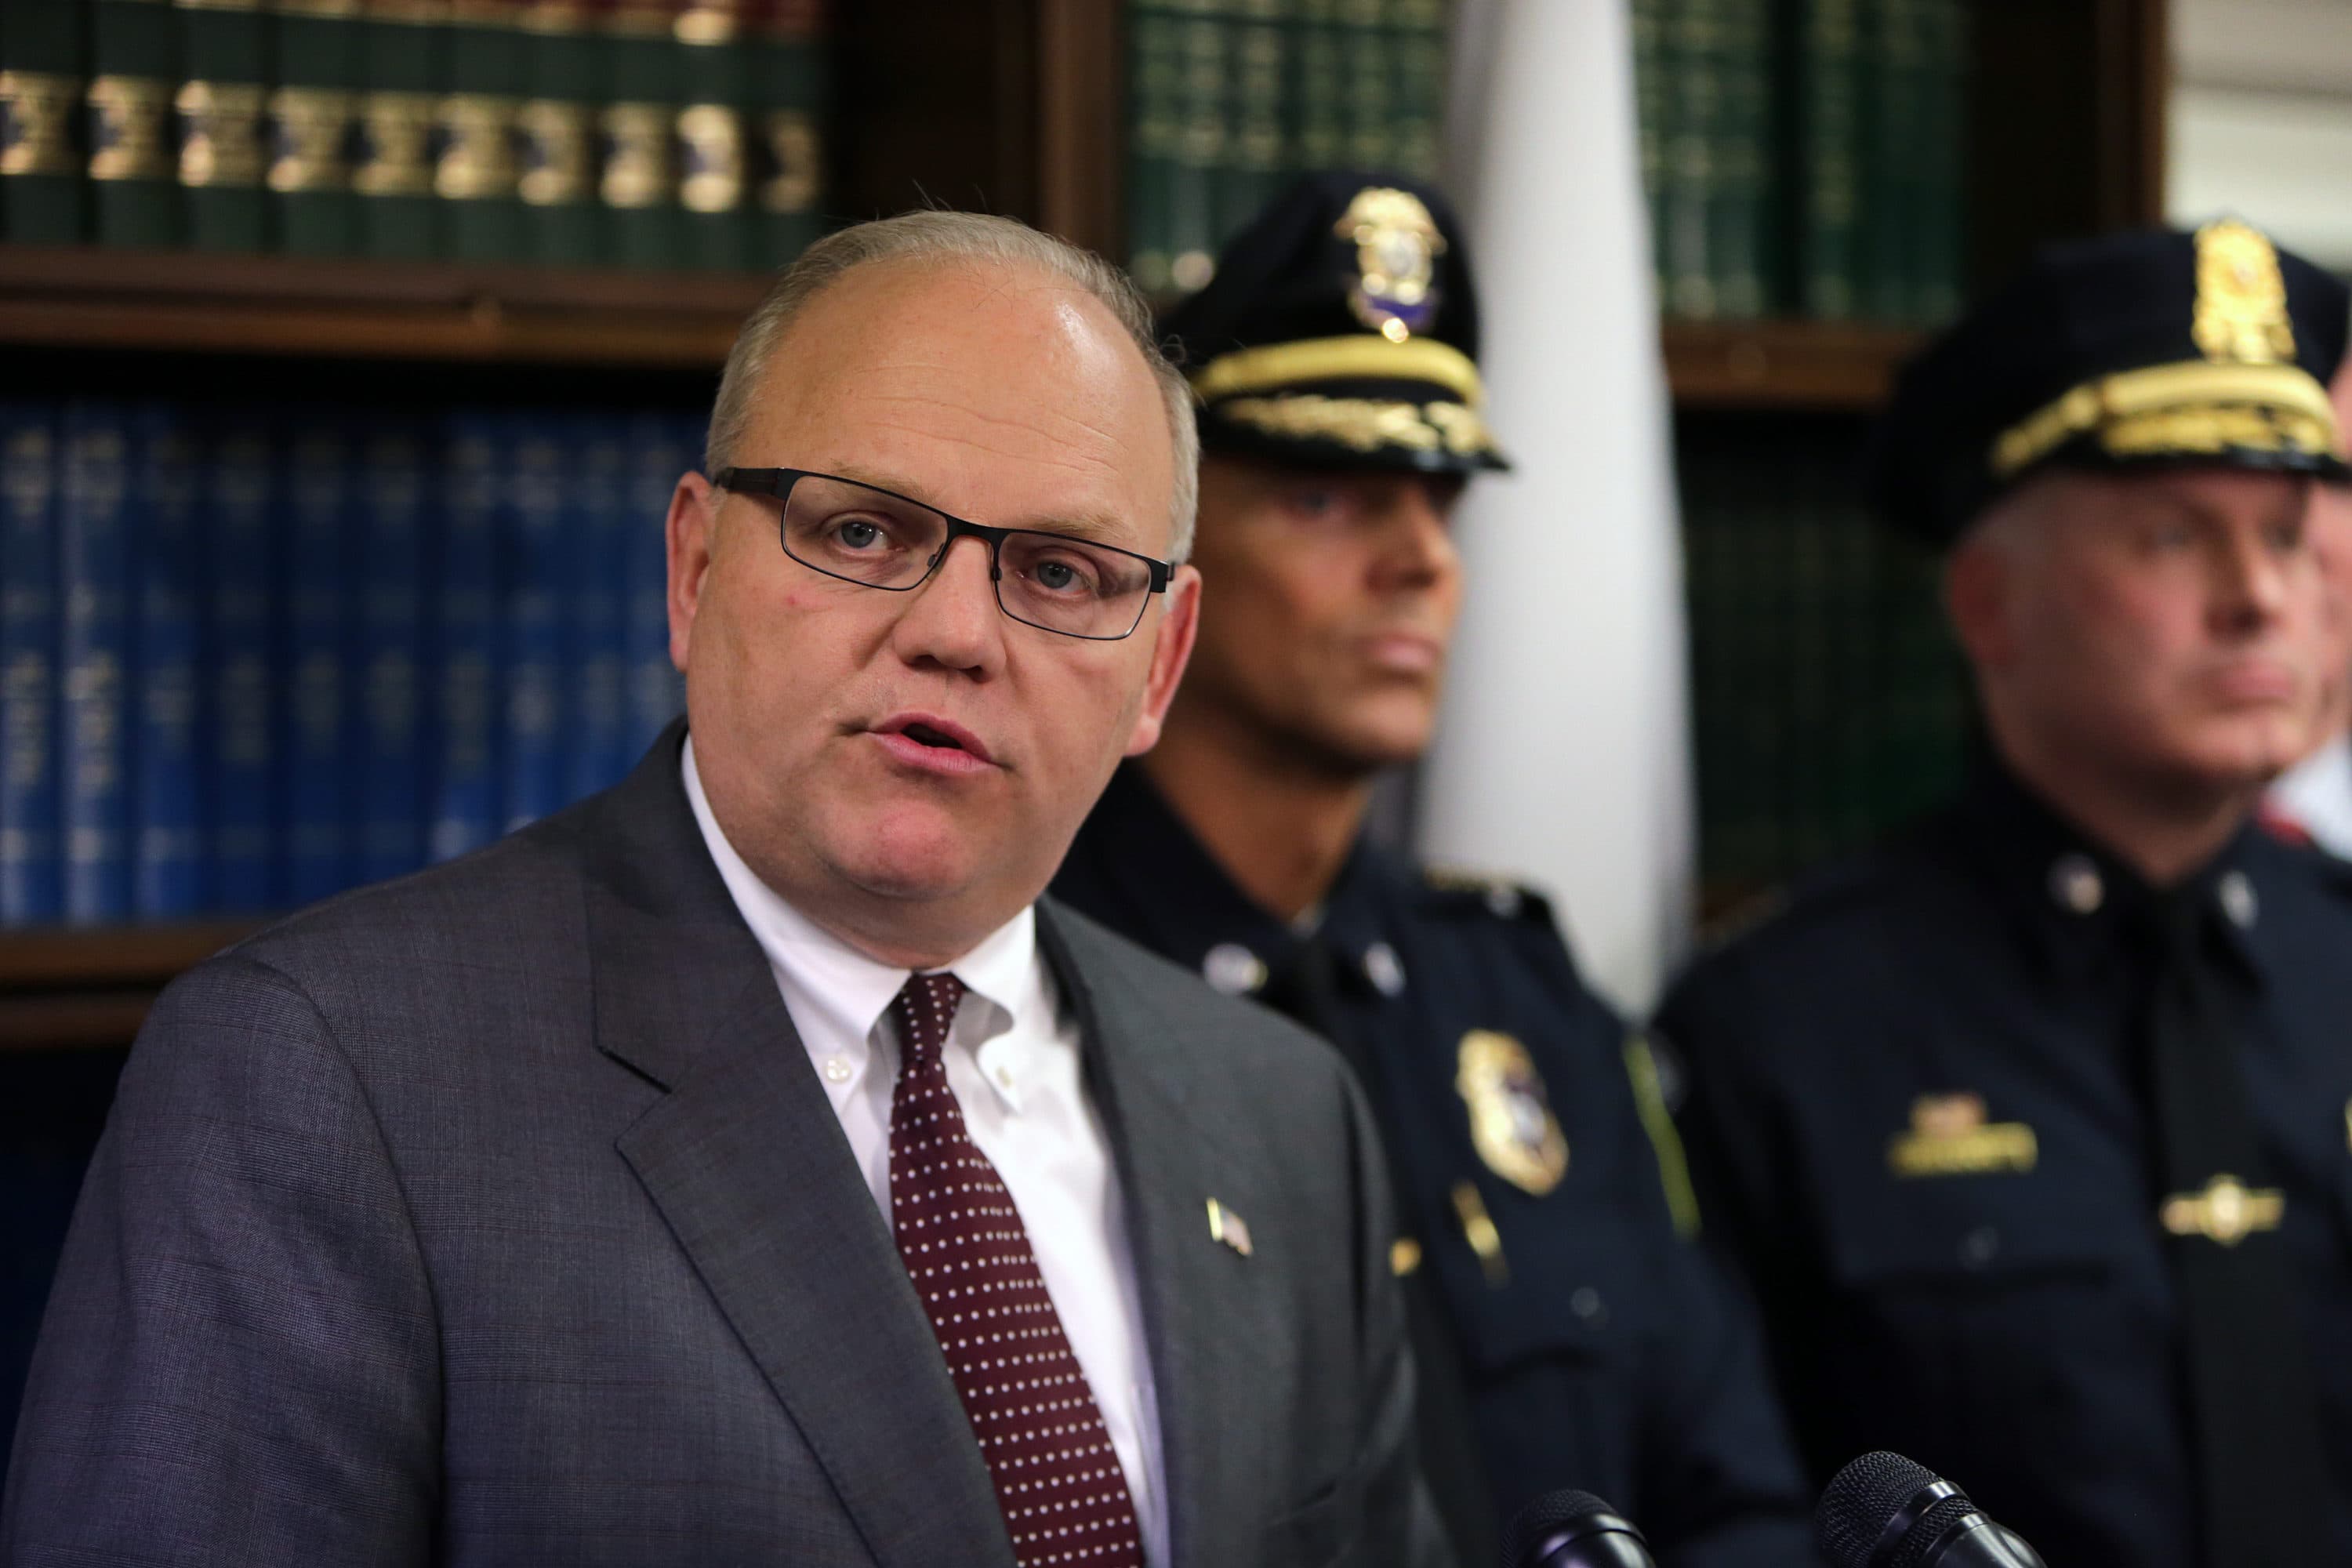 Plymouth County District Attorney Tim Cruz holds a news conference in 2017. (Barry Chin/The Boston Globe via Getty Images)